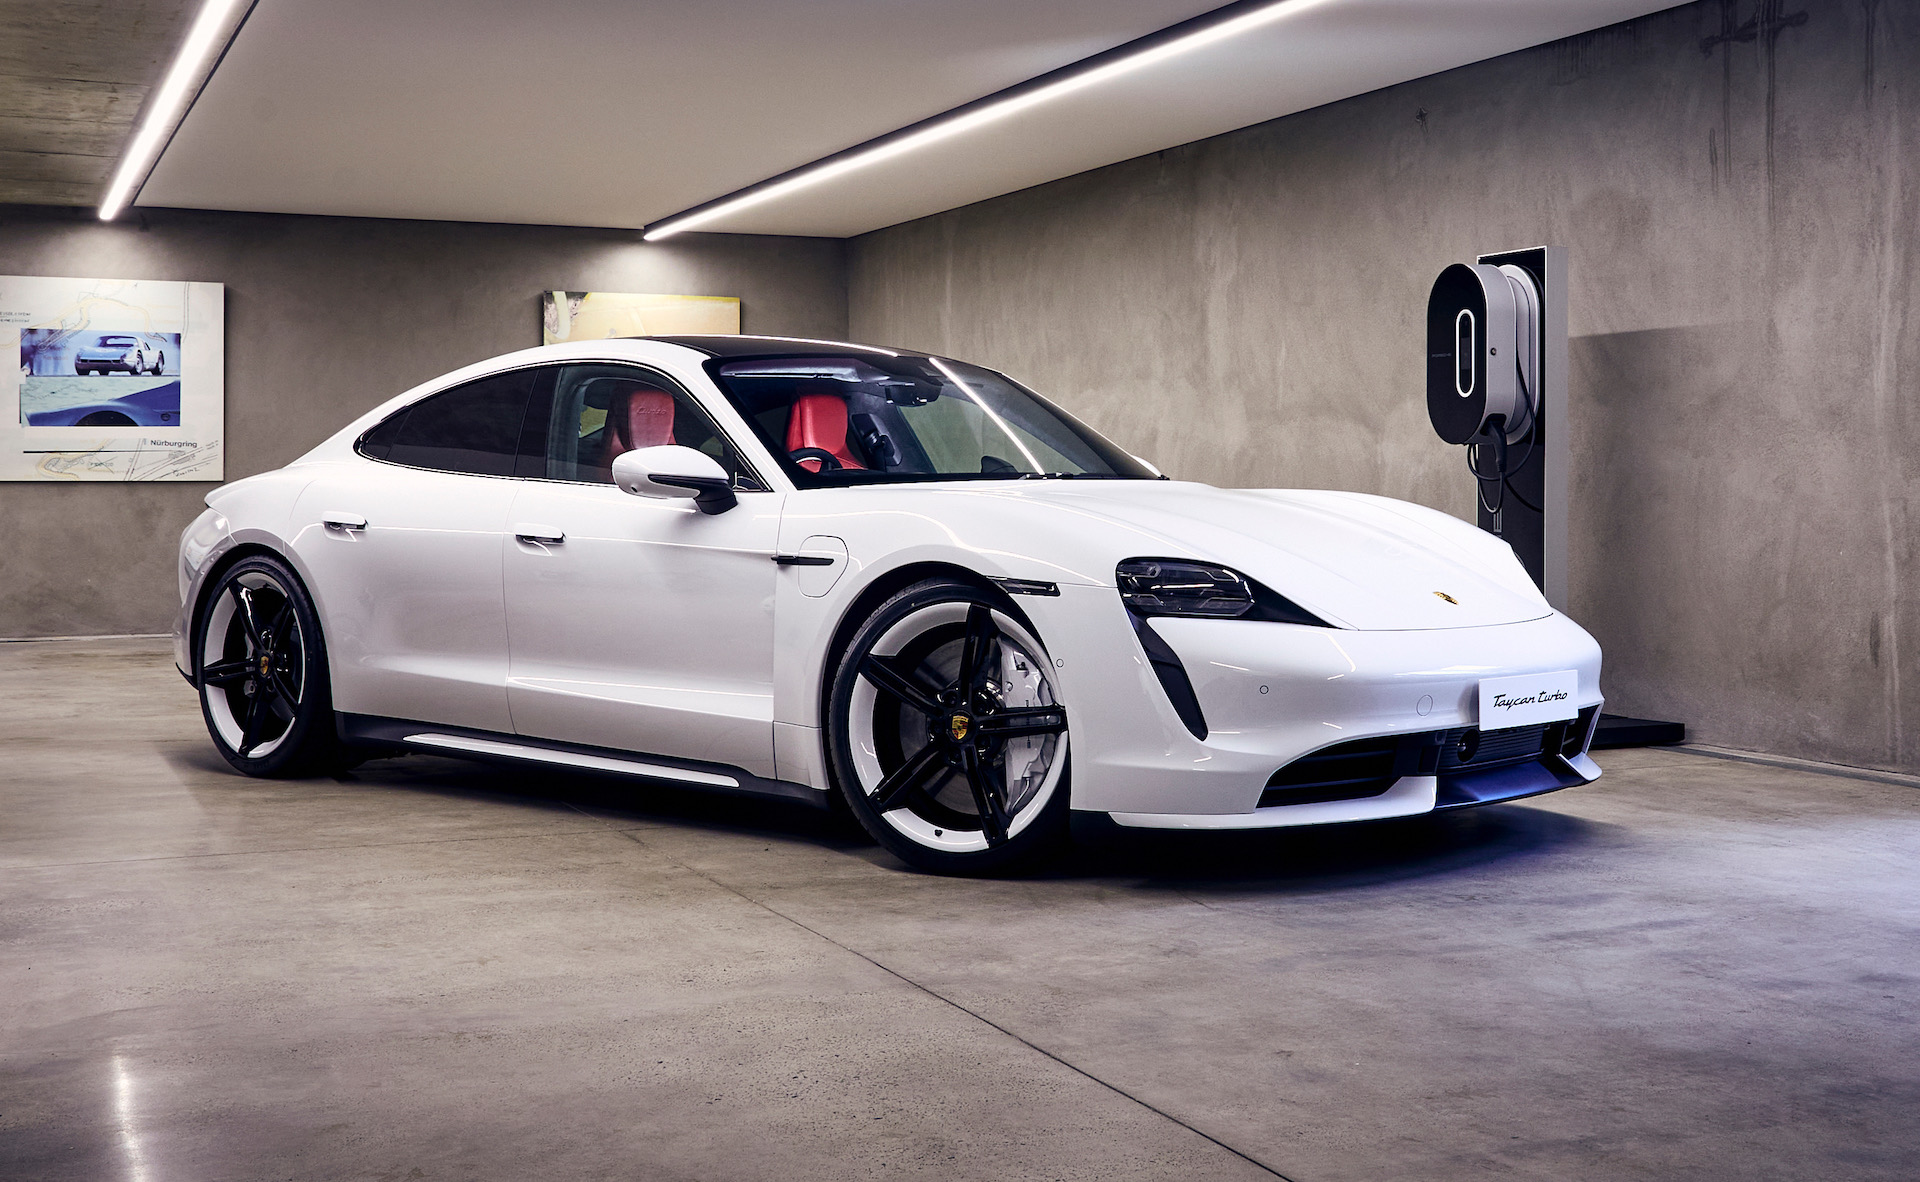 Porsche Taycan now on sale in Australia, priced from $191,000